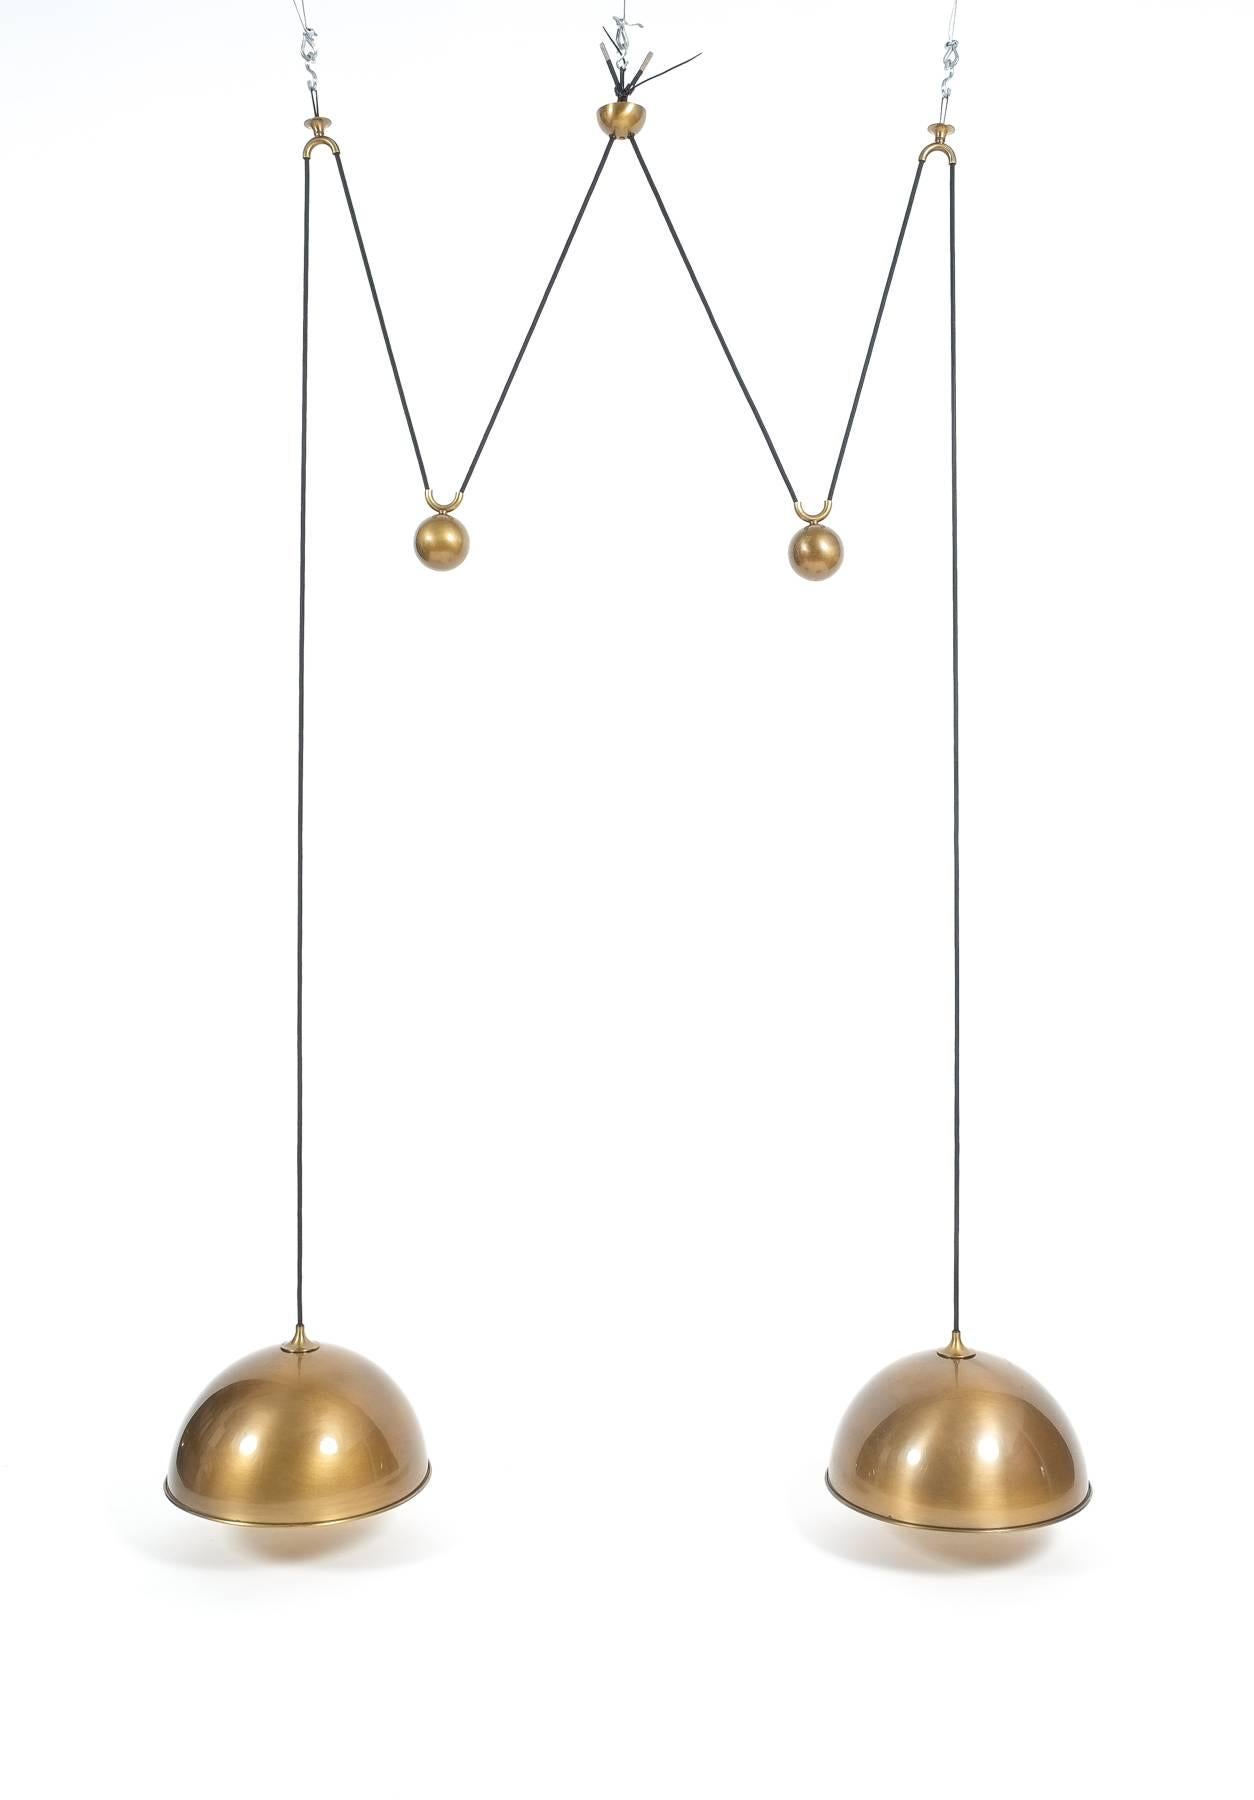 Elegant double counter balance pendants by Florian Schulz with a burnished brass finish and heavy counterweight to easily adjust the light in height. Each light is adjustable in height without affecting the other. Excellent condition, it holds two